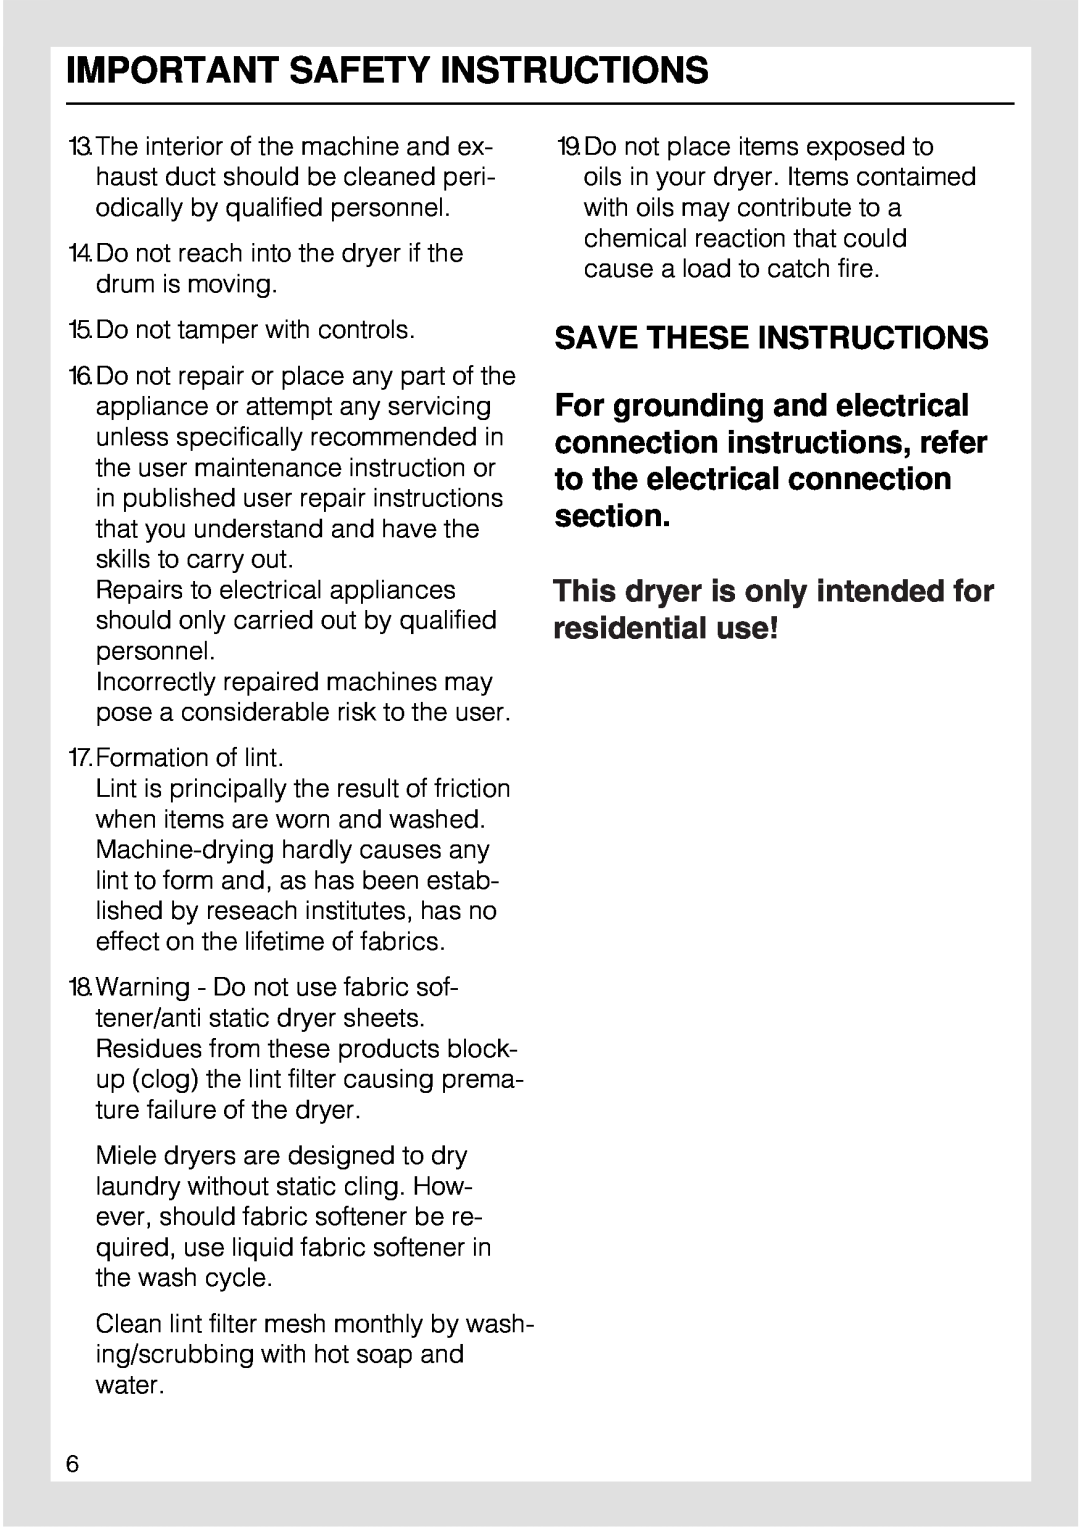 Miele T 1515 Save These Instructions, This dryer is only intended for residential use, Important Safety Instructions 